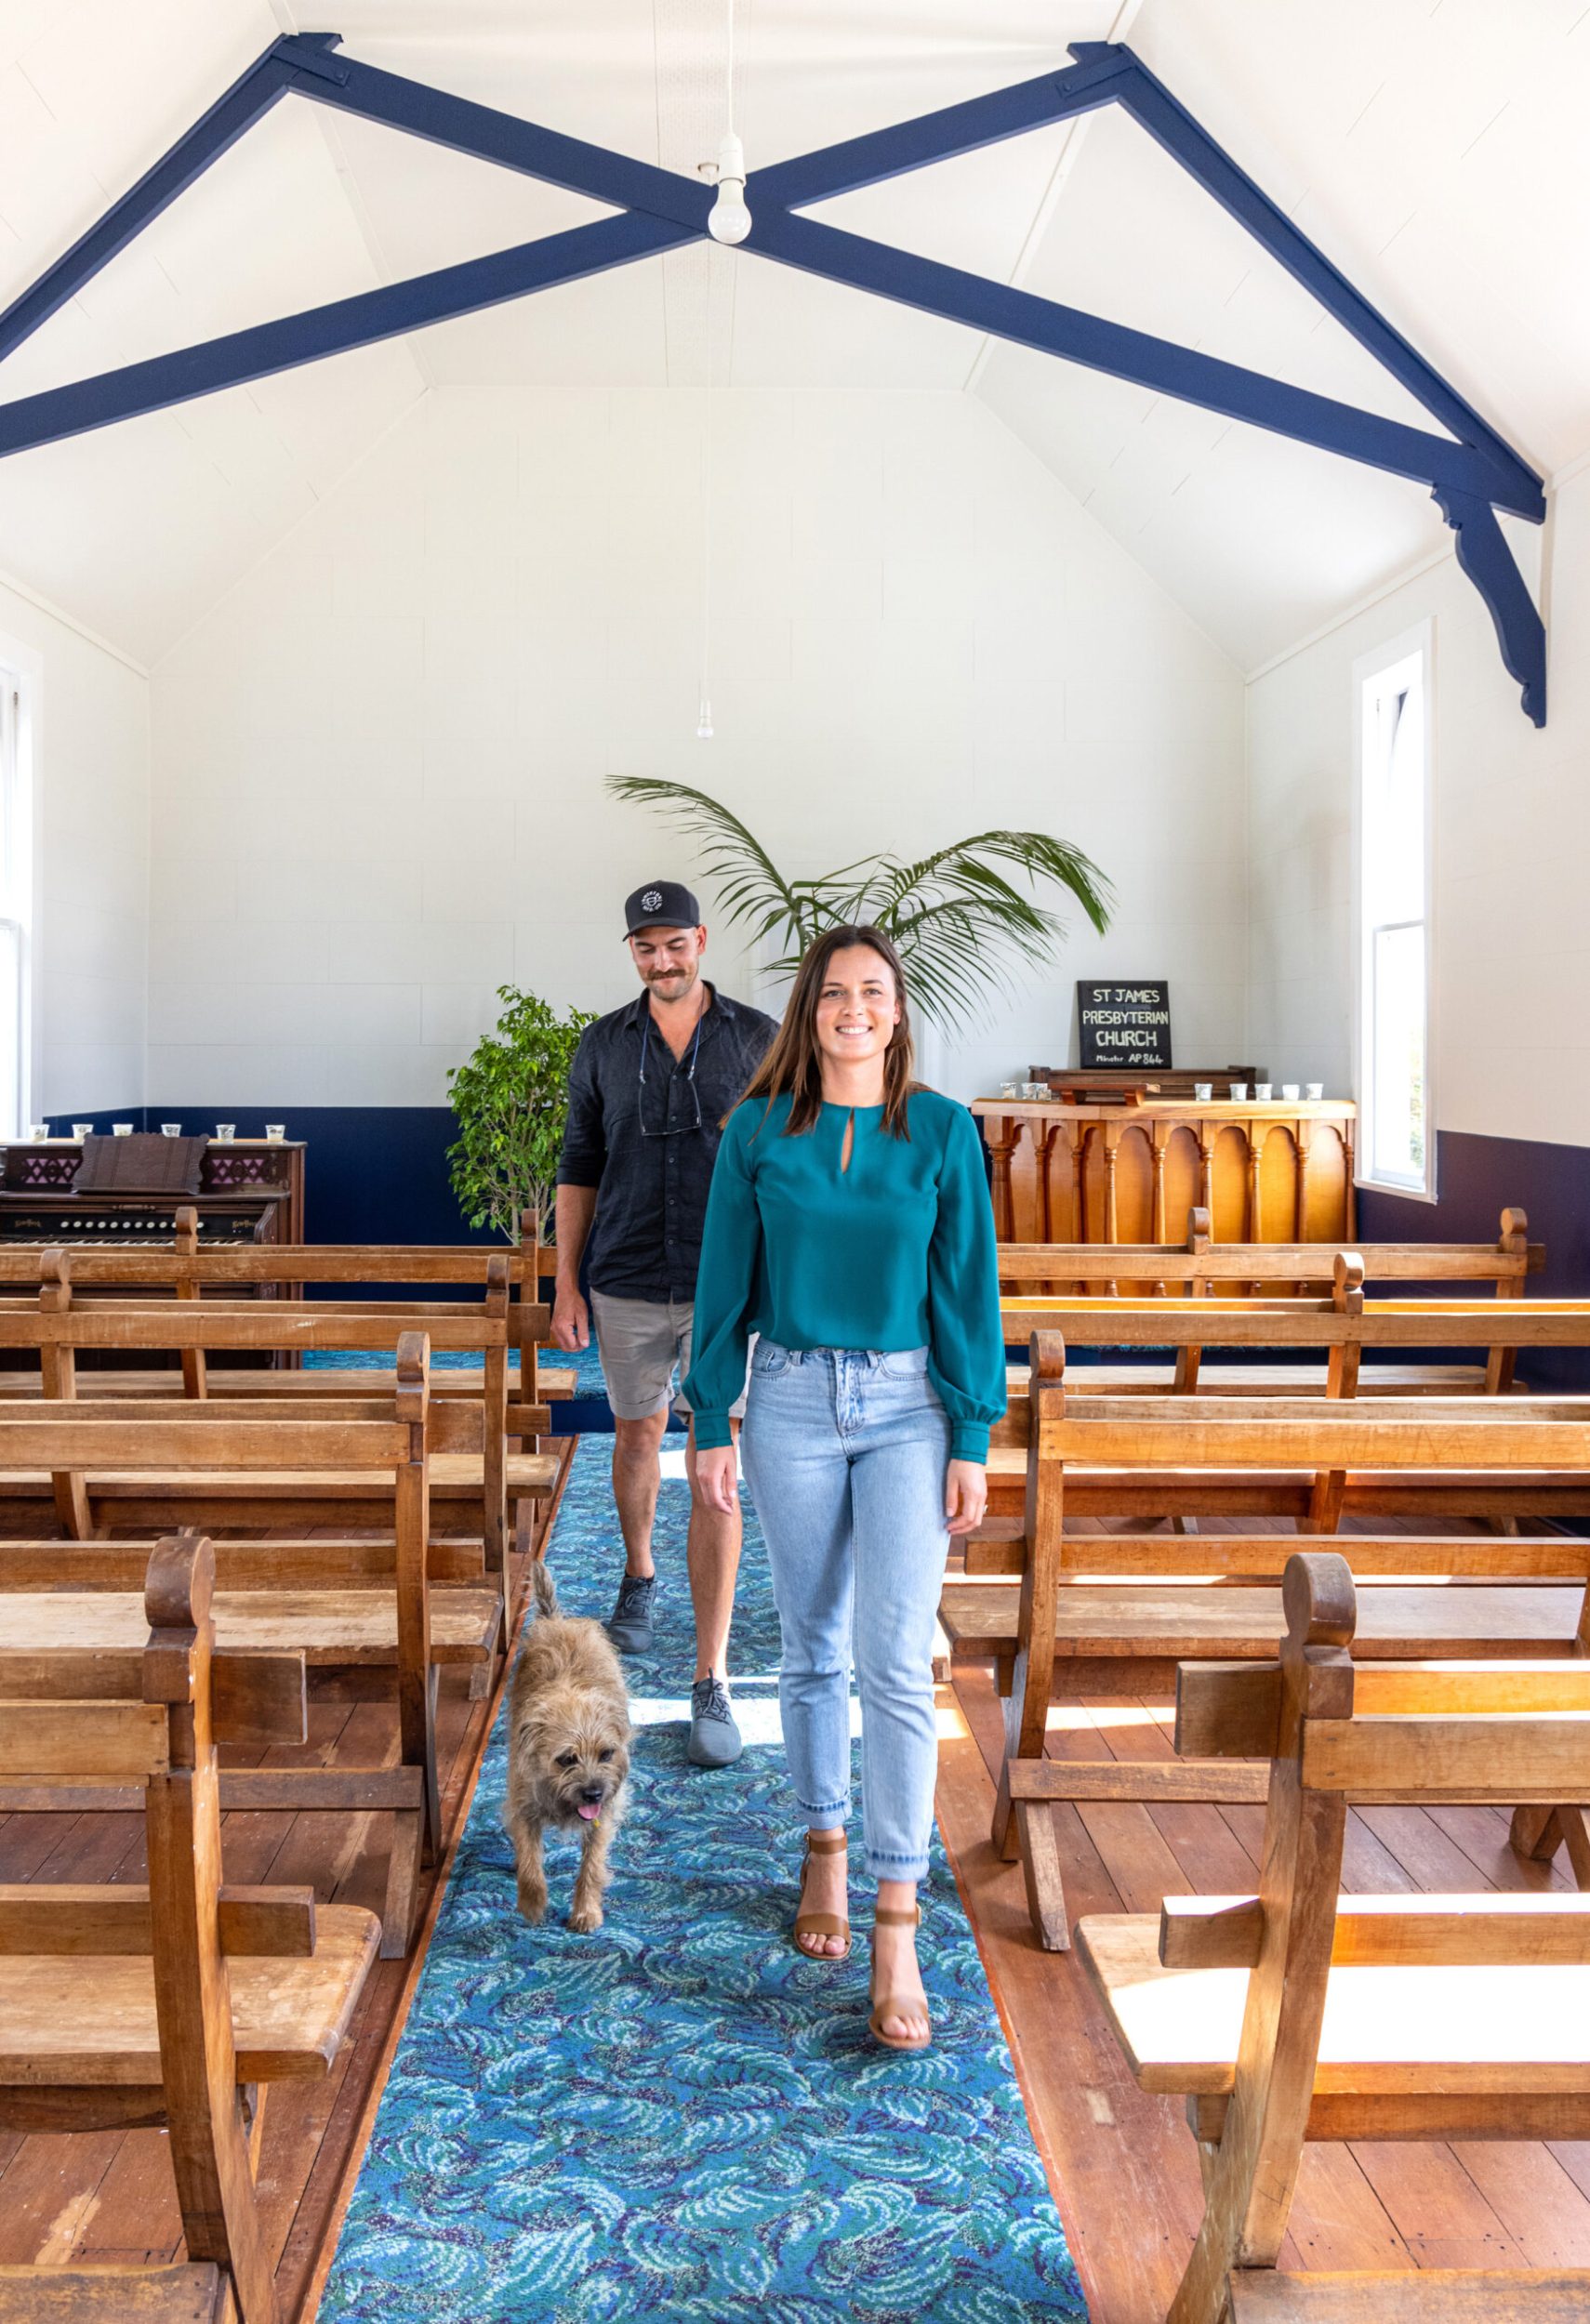 Jemma and Alex Robertson and pet dog Riff Raff walkinginside a white church with brown wooden pews and navy panels